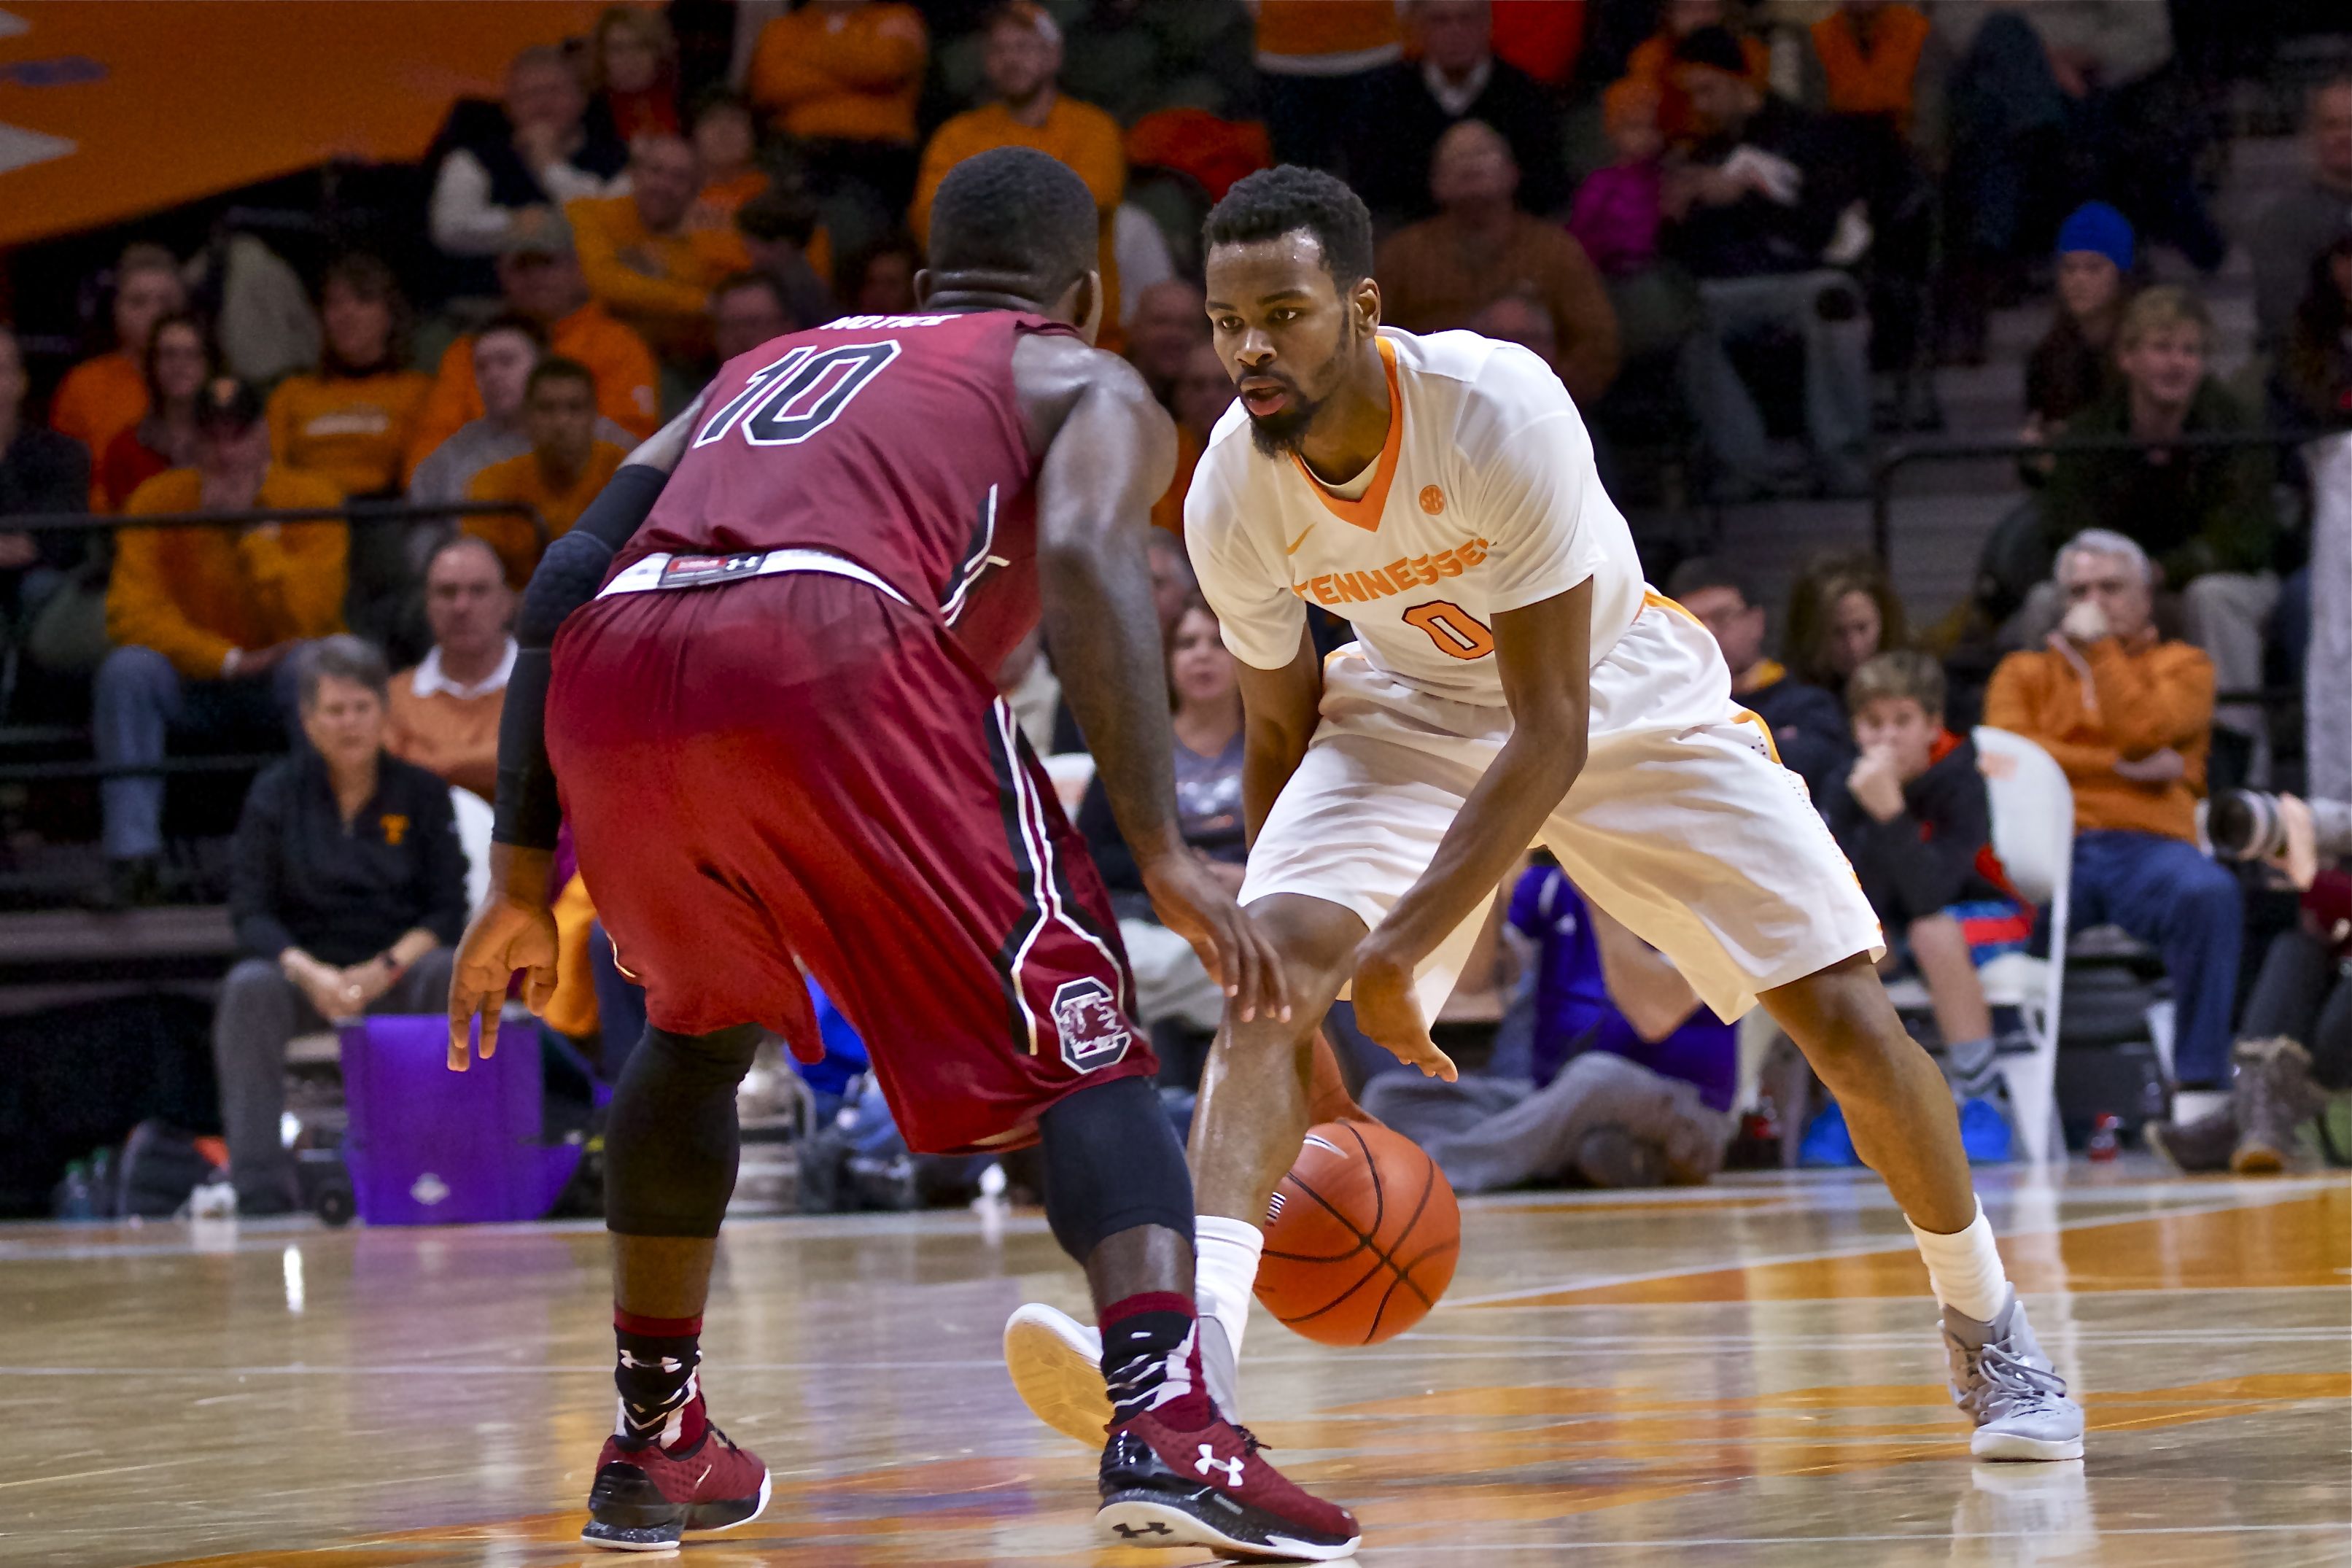 Career-high 36 points from Kevin Punter vaults Vols over #24 Gamecocks 78-69